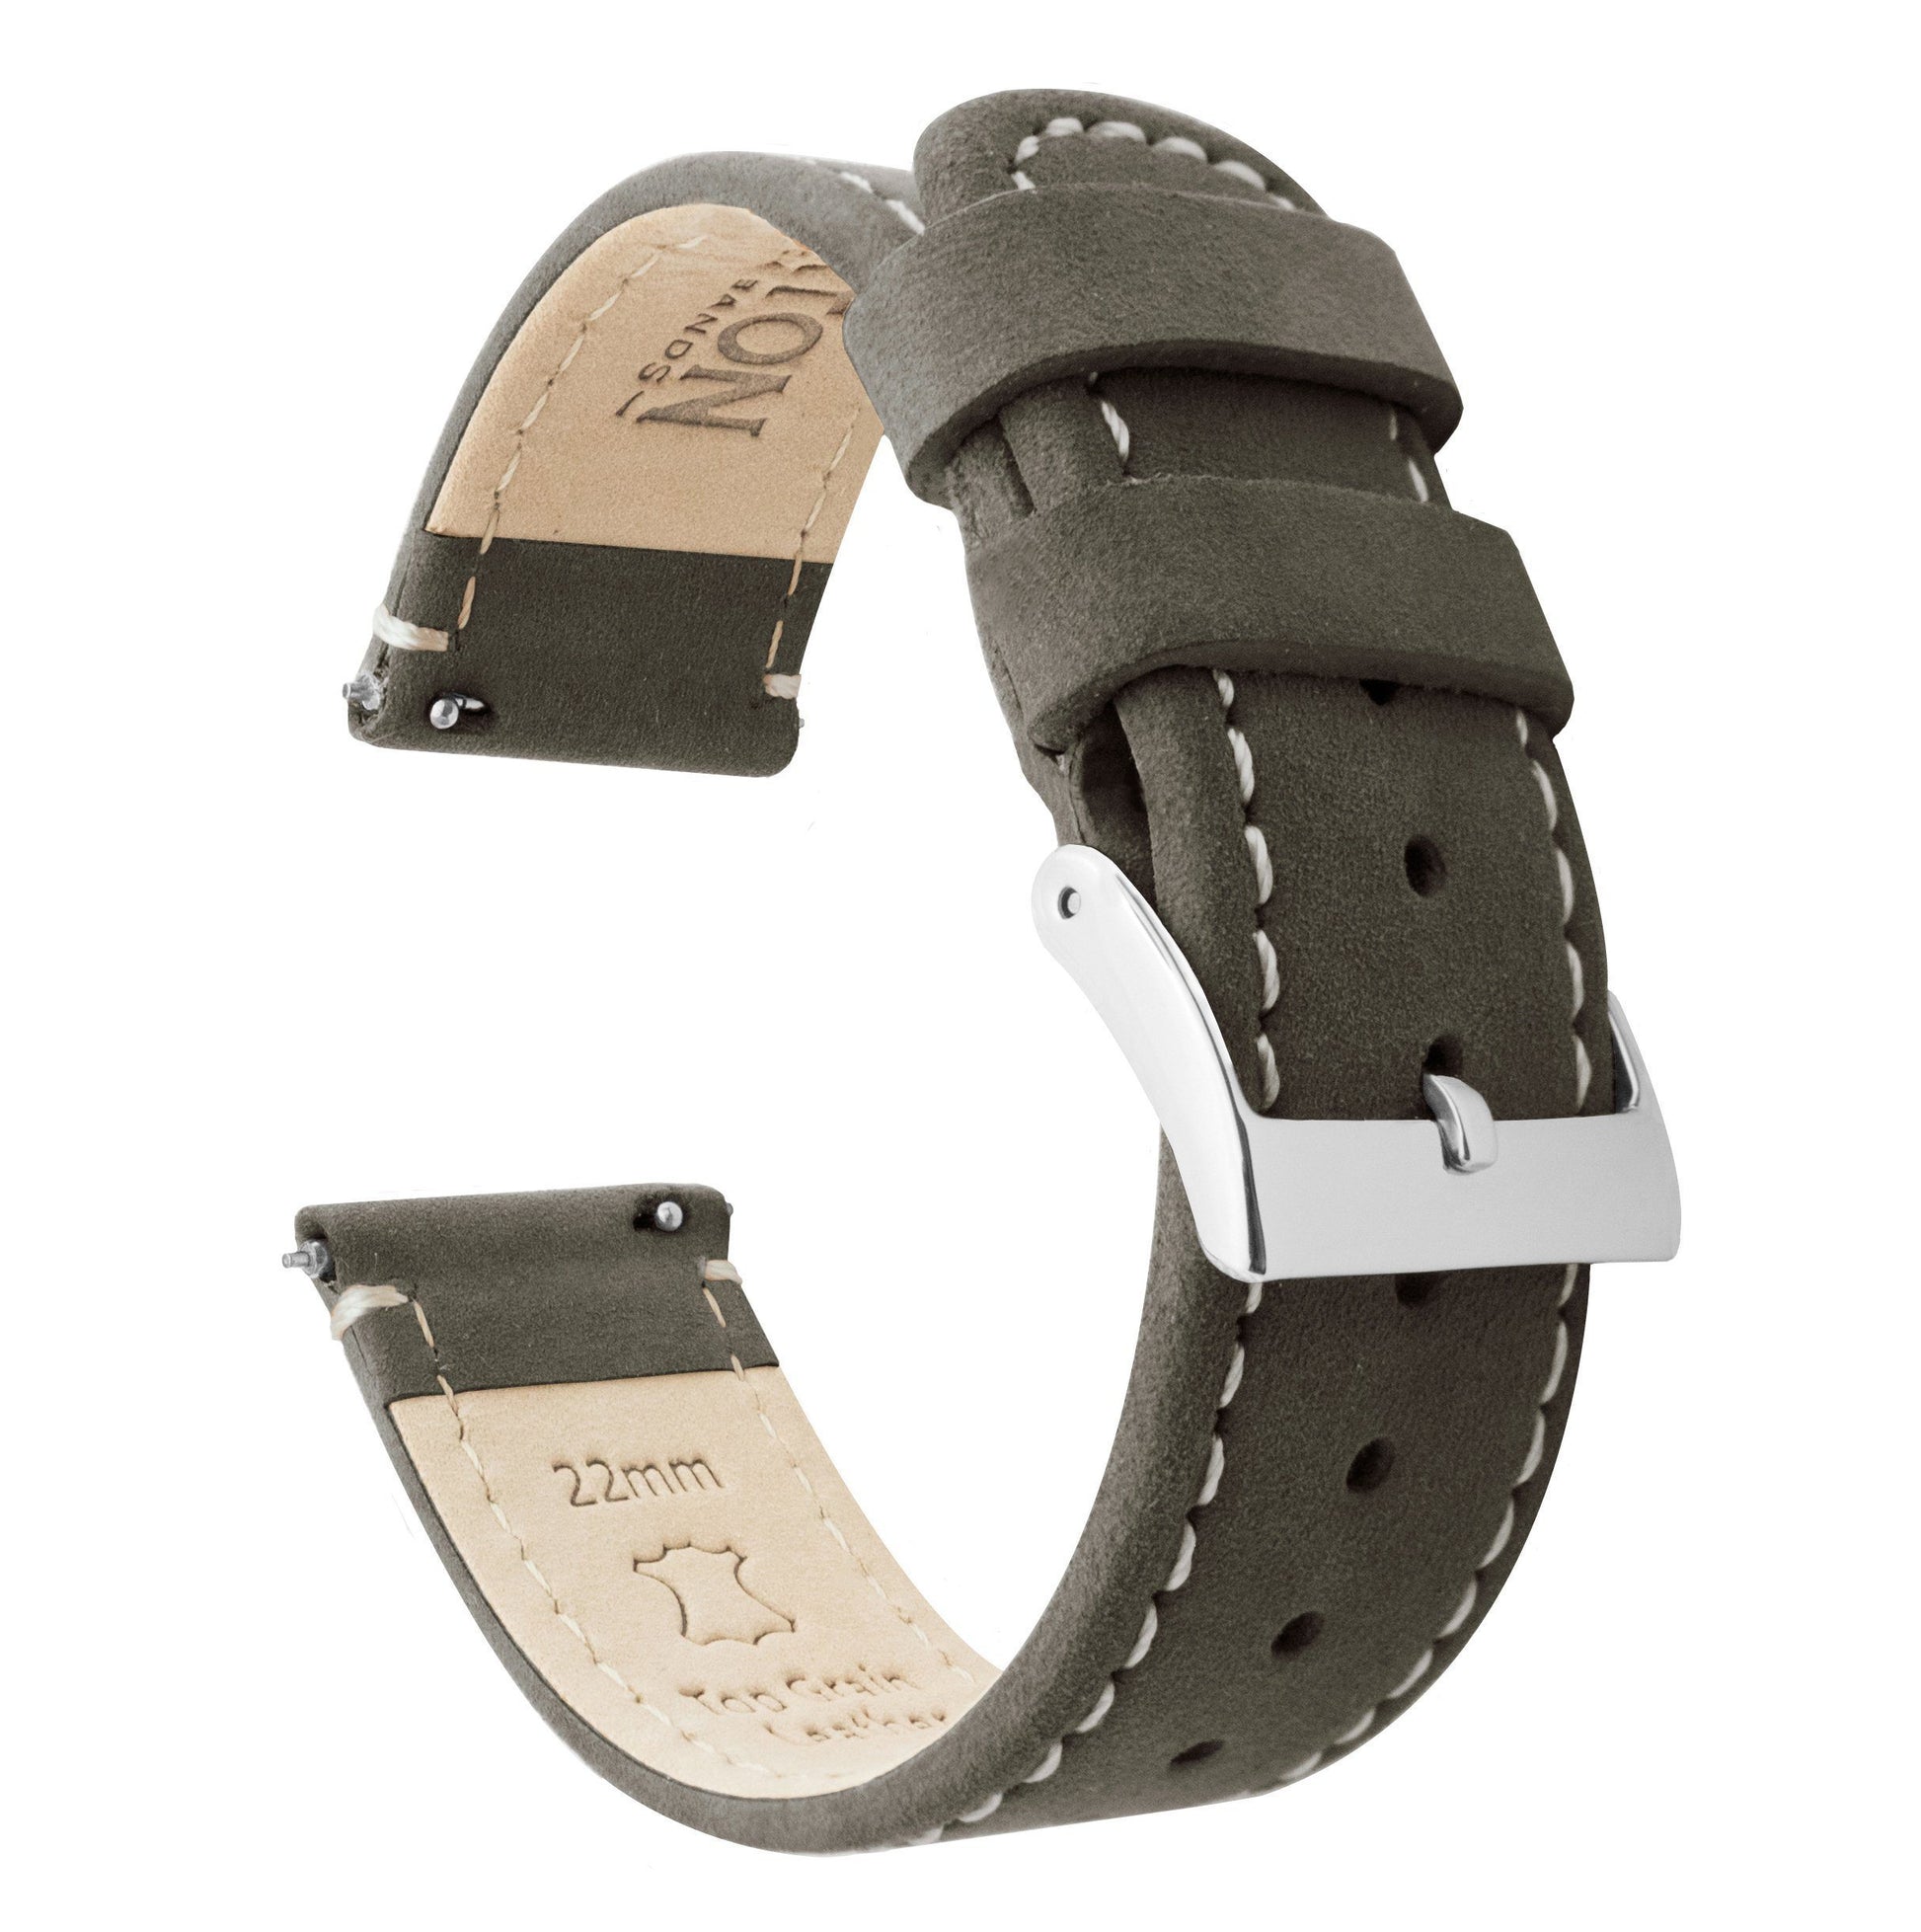 Fossil Q | Espresso Brown Leather & Linen White Stitching - Barton Watch Bands